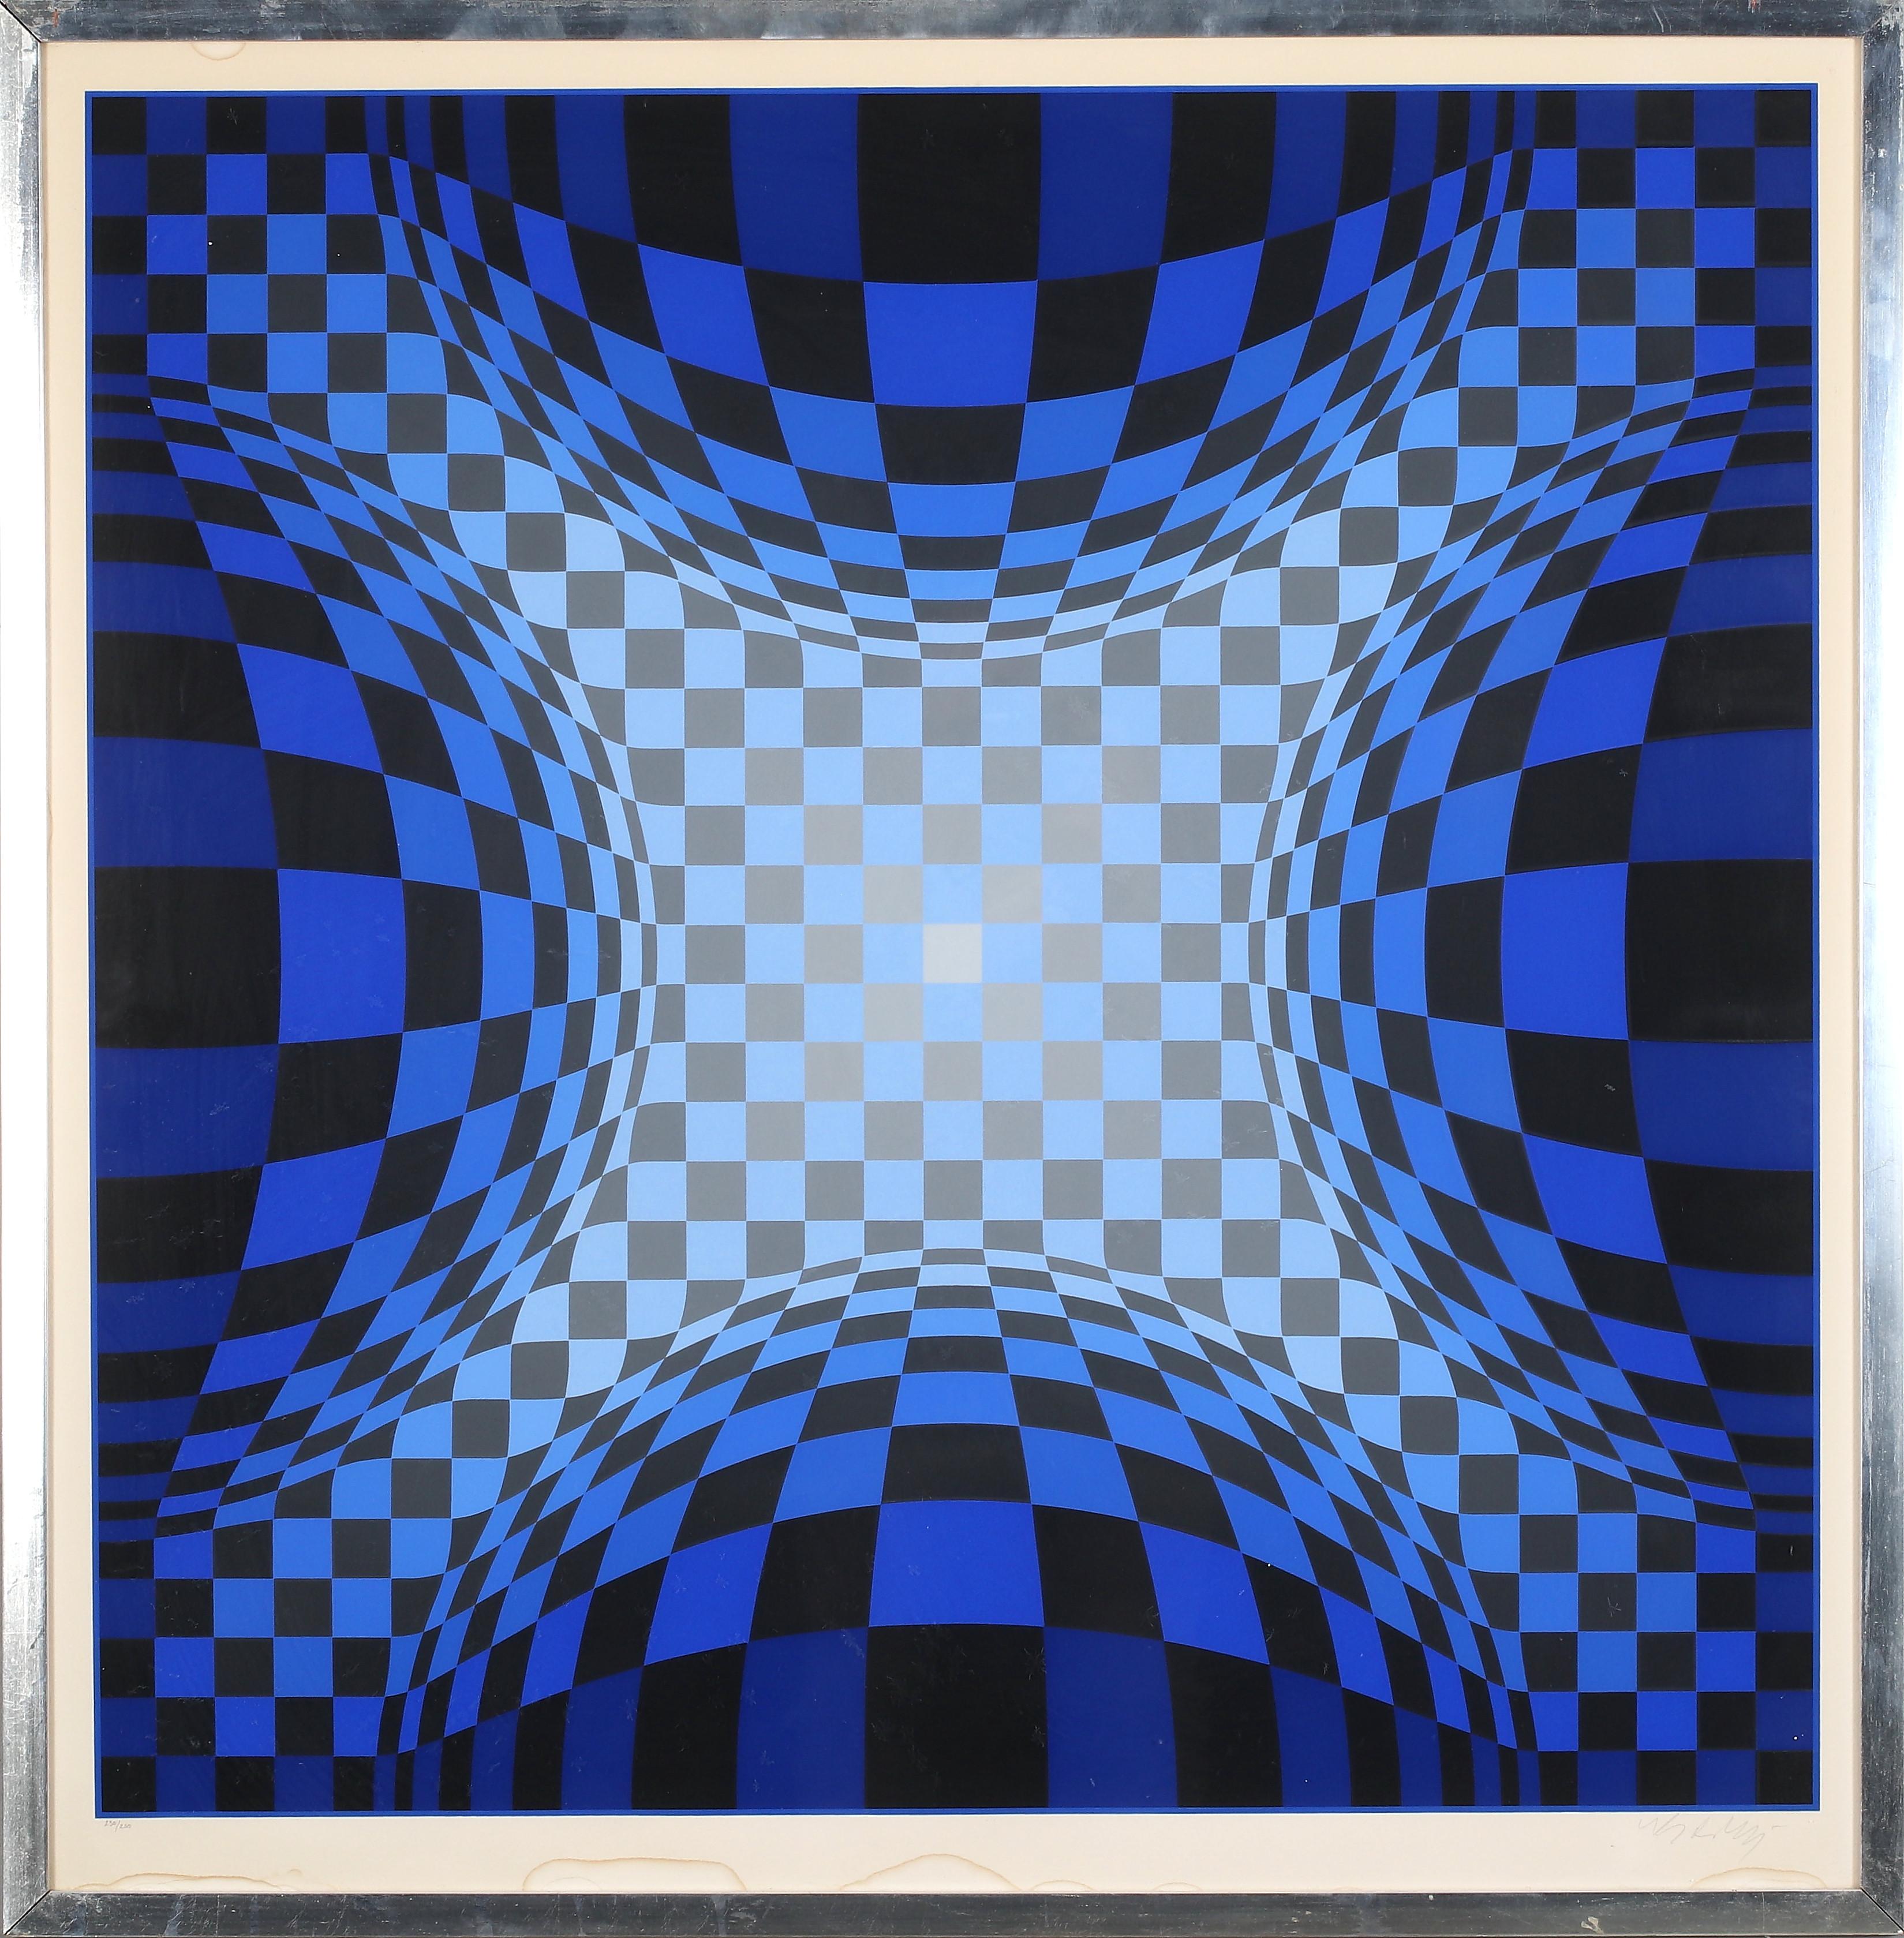 Victor Vasarely (1906-1997)
Ond-LZ, from Gaia (Benavides 263), 1975
Screenprint in colors on wove paper, signed and numbered 230/250, with the blindstamp of the publisher Editions Denise René, Paris, printed by Atelier Arcay, Paris, with full